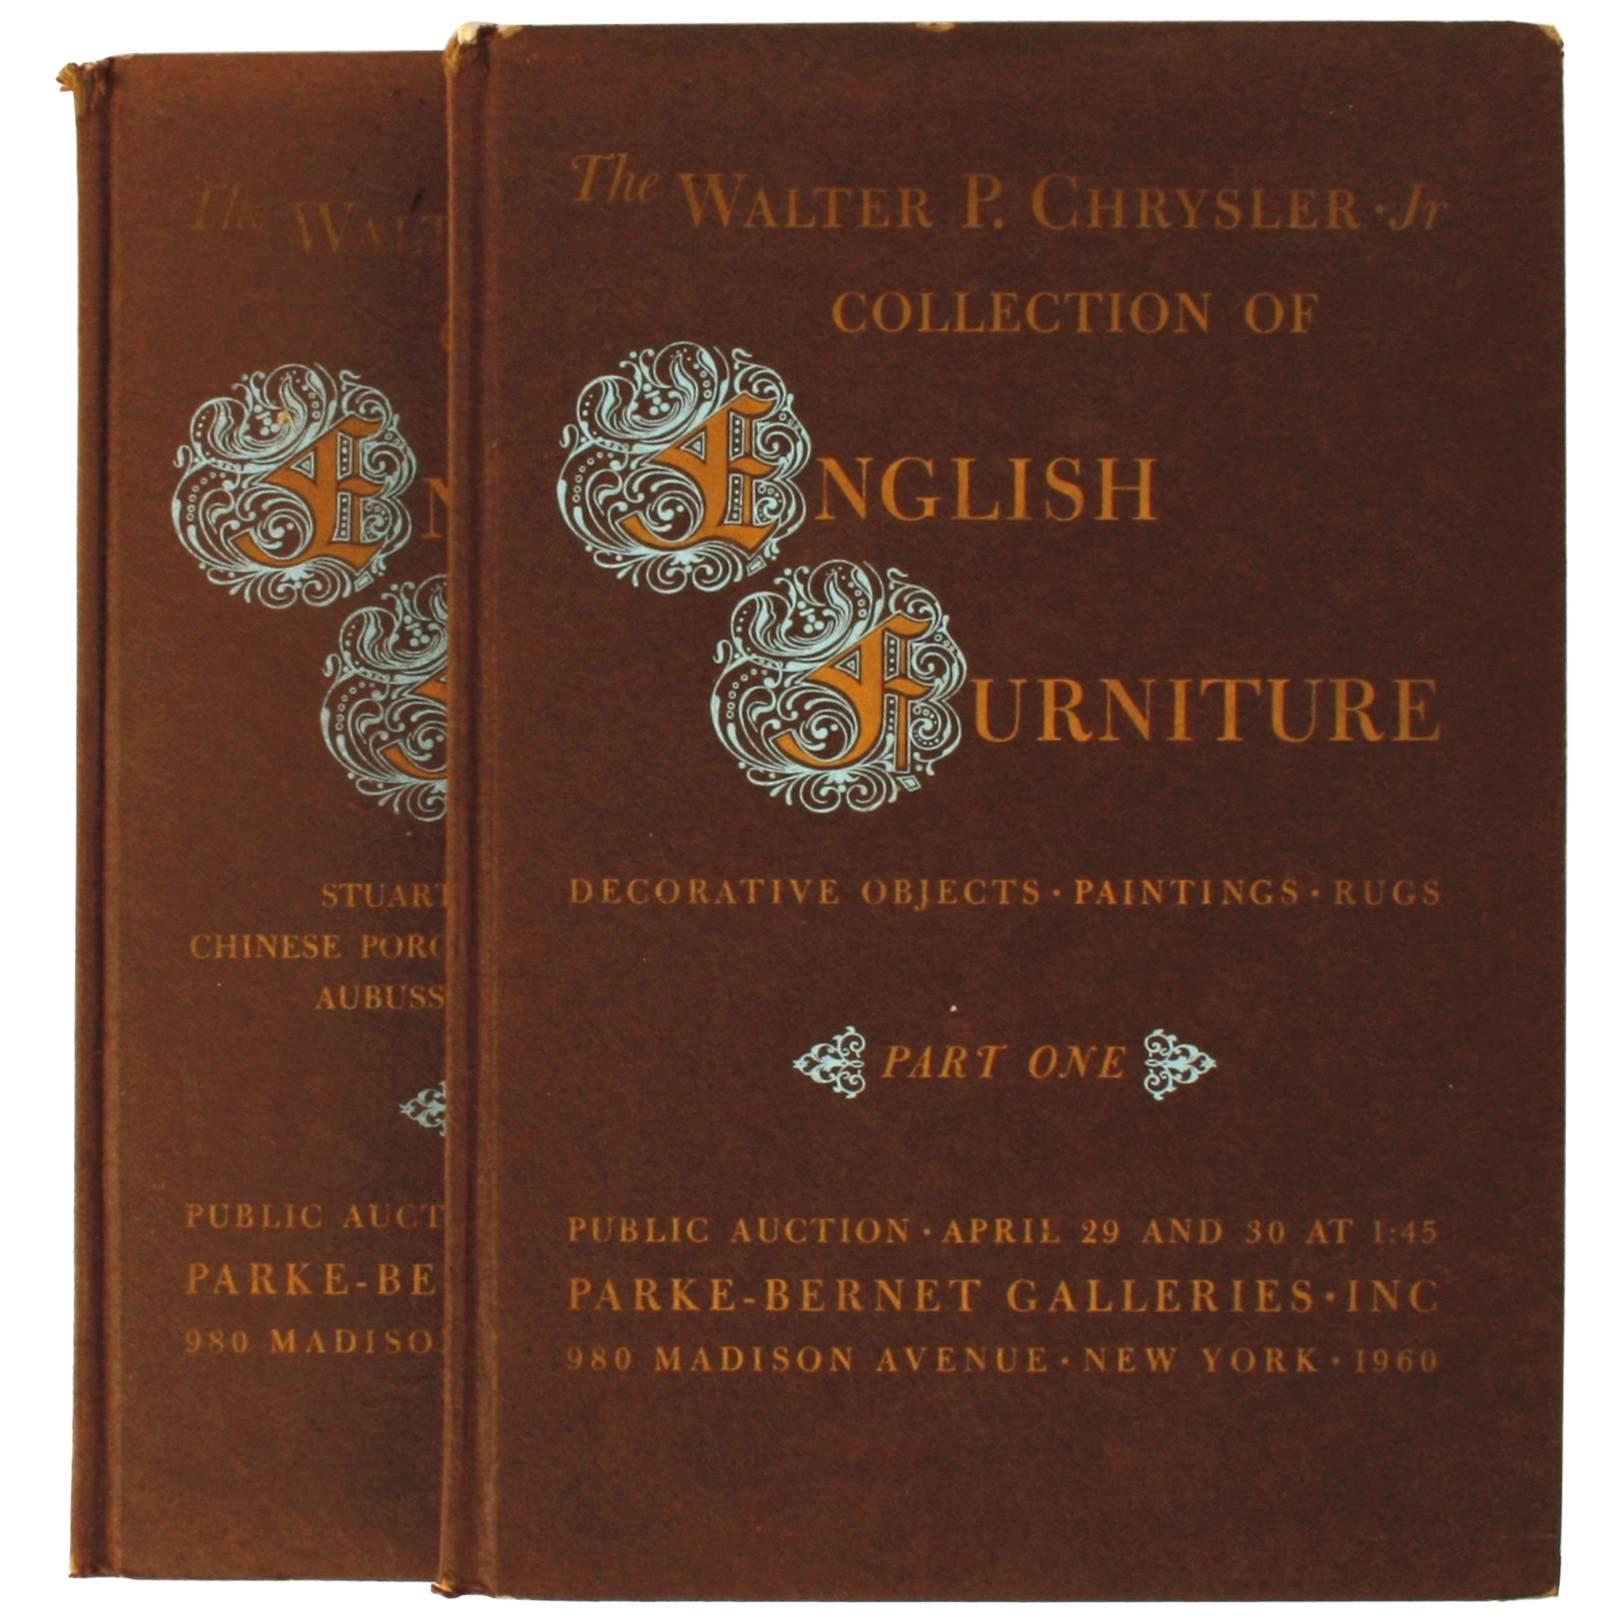 Auction Catalogues from Walter Chrysler Jr. Collection of English Furniture For Sale